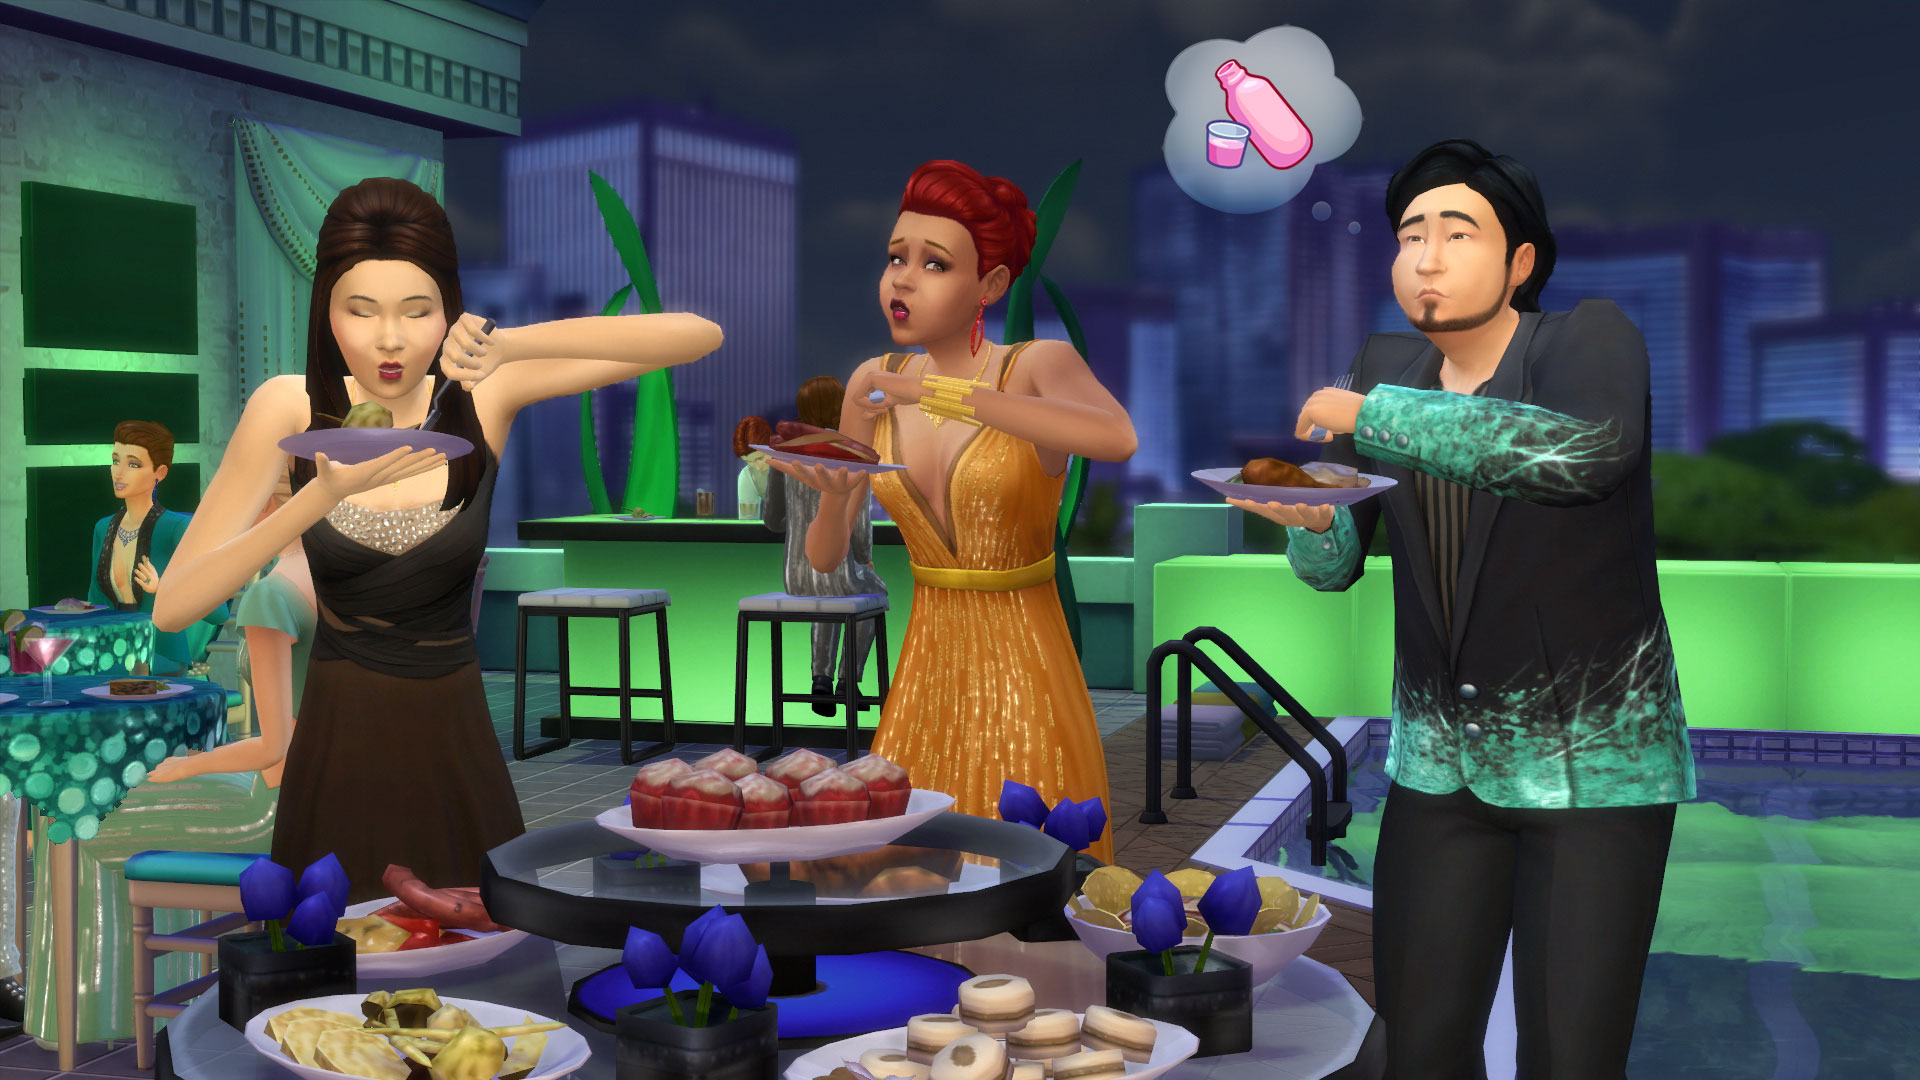 the sims 4 latest update?